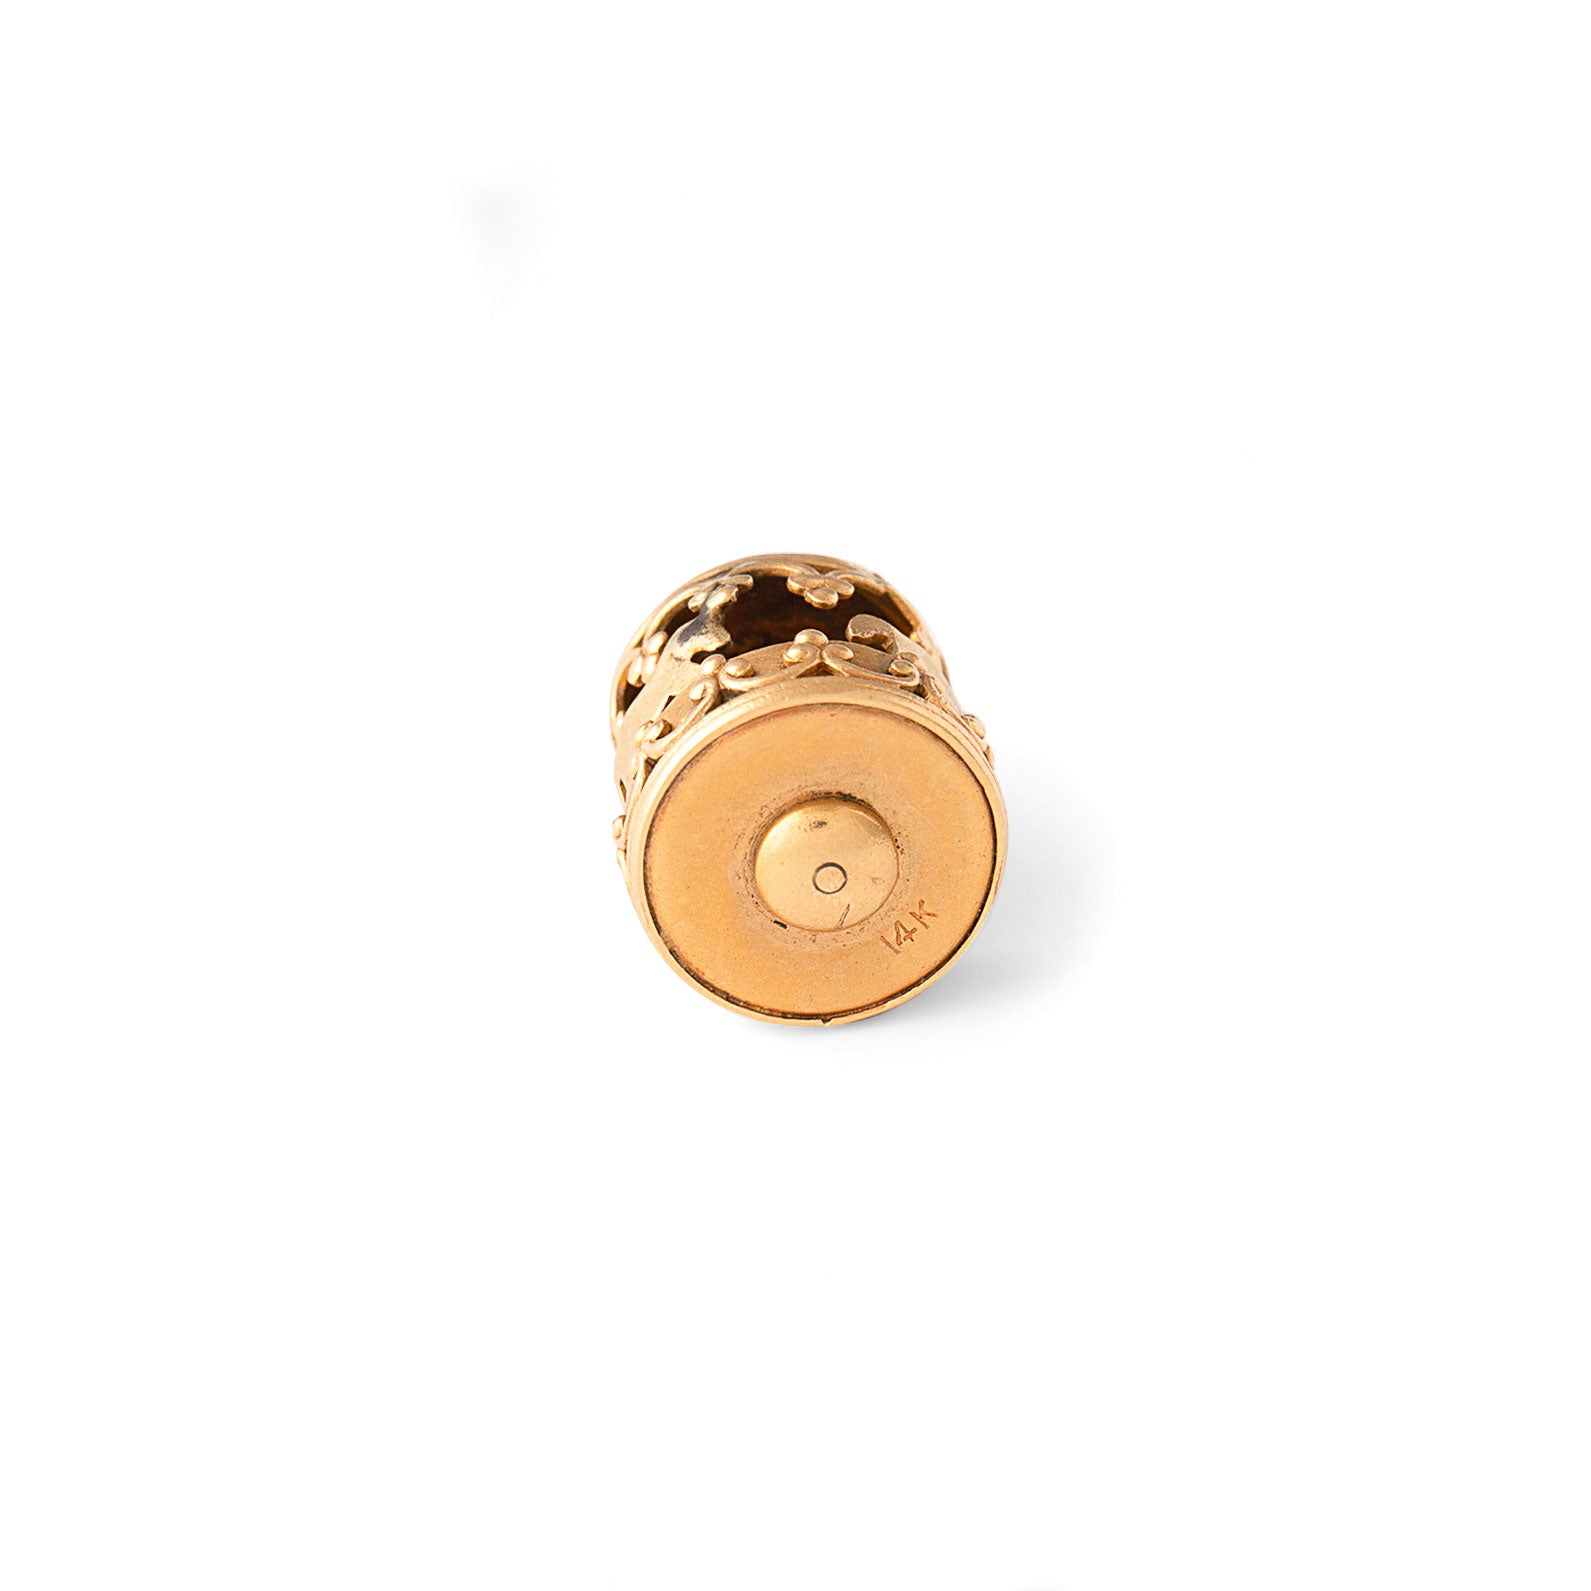 Movable Merry Go Round 14k Gold Charm